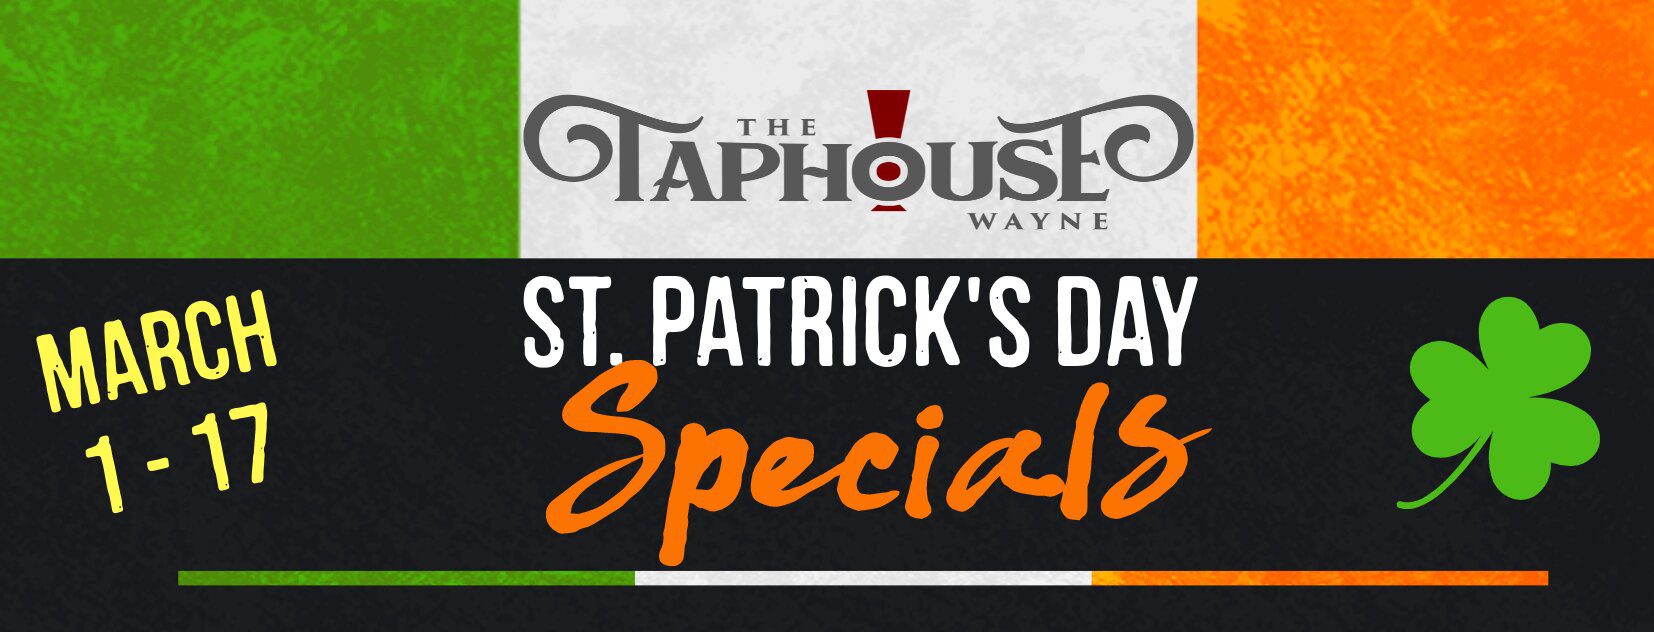 St. Patrick's Day 2022 Specials at The Taphouse - Wayne